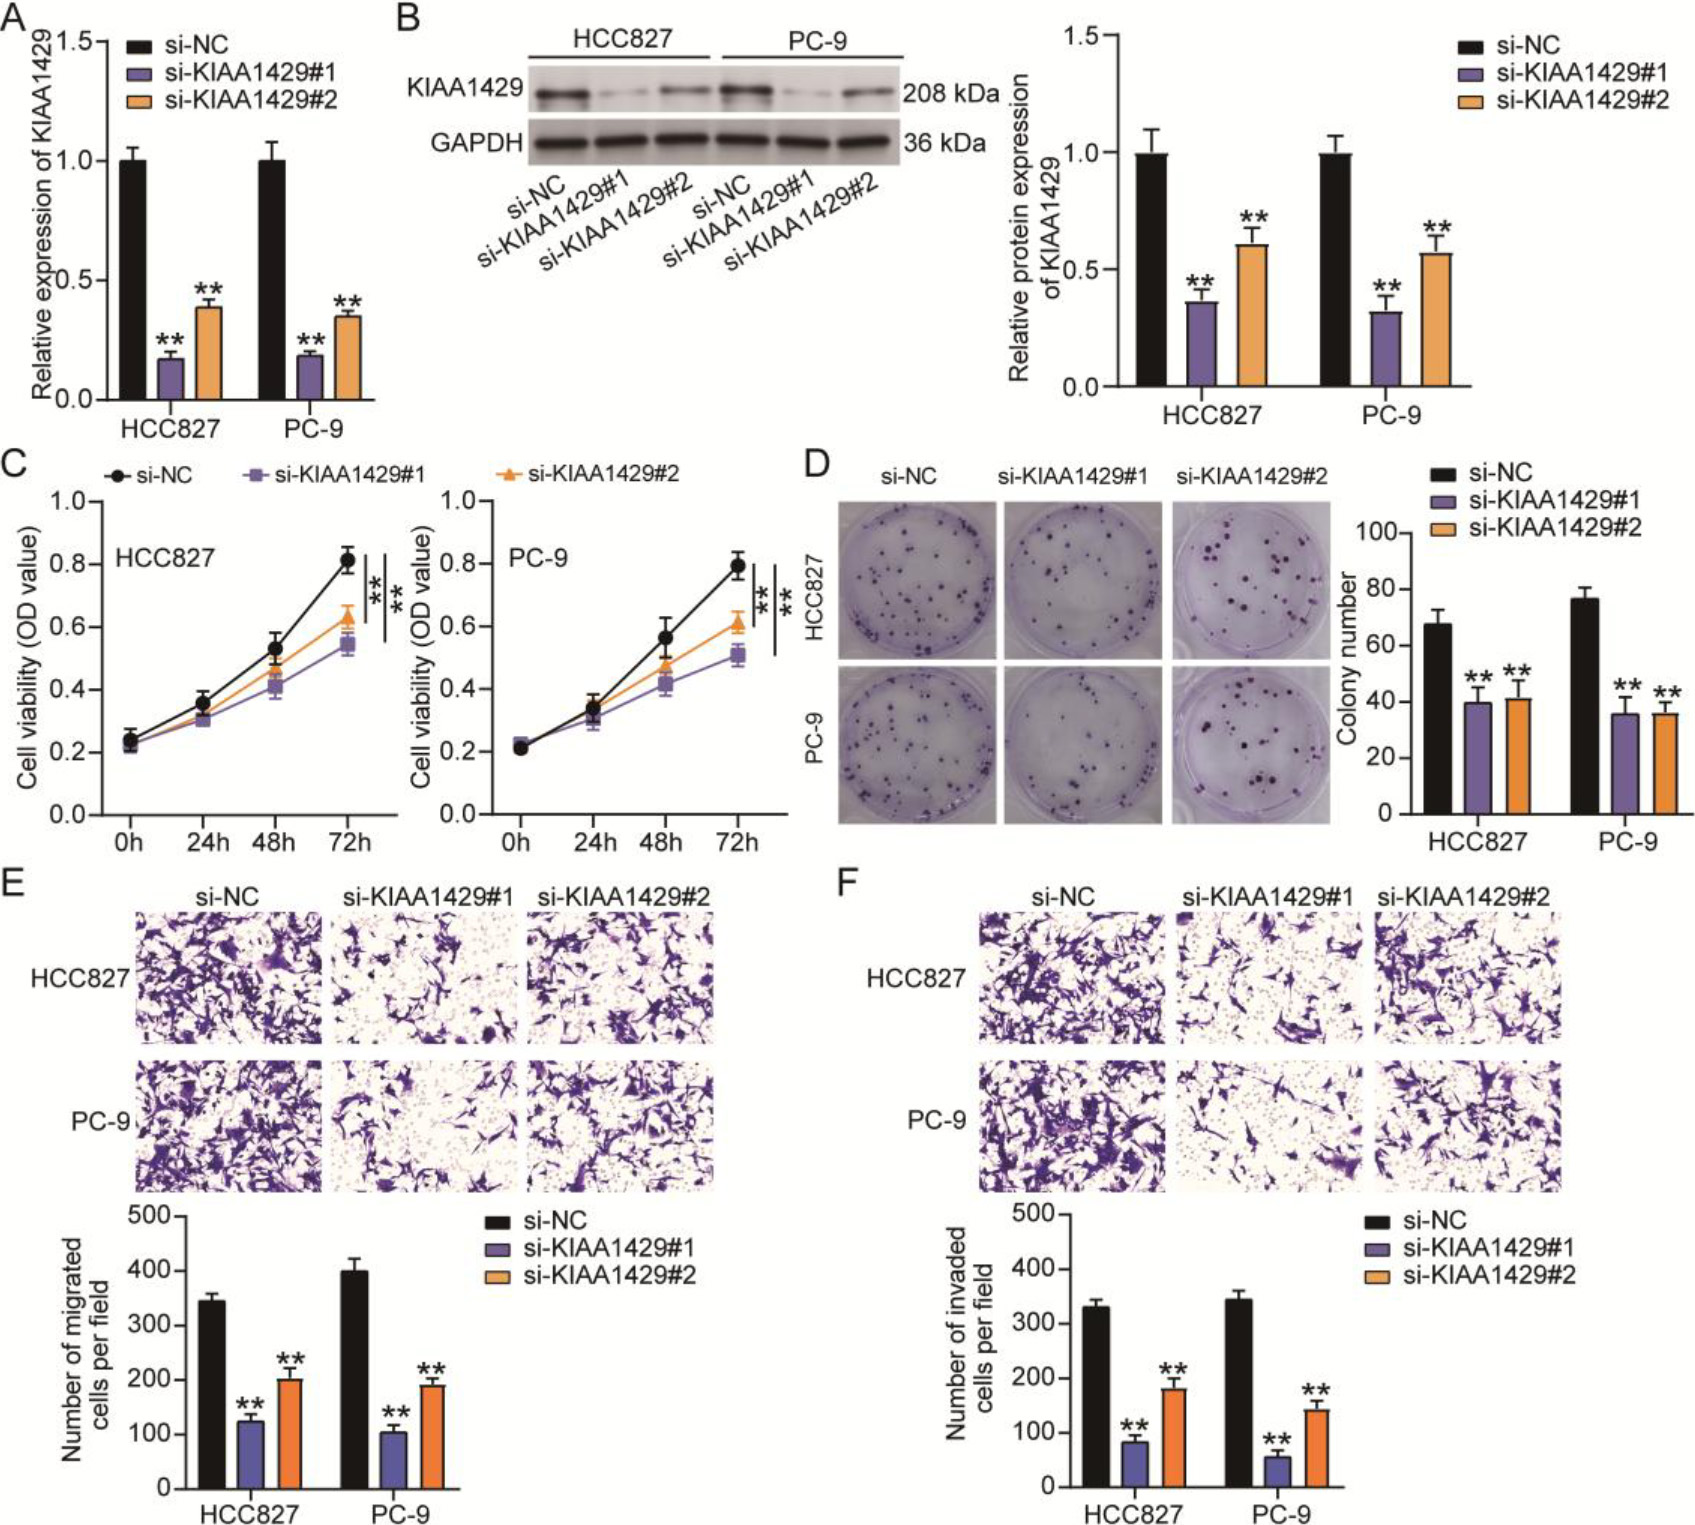 The effect of KIAA1429 knockdown on non-small cell lung cancer (NSCLC) cell malignancy. Quantitative real-time polymerase chain reaction (A) and western blotting (B) confirmed the transfection efficiency of two siRNAs targeting KIAA1429 (si-KIAA1429#1 and si-KIAA1429#2) in NSCLC cells. (C) The cell counting kit-8 assay was used to analyze the effect of KIAA1429 knockdown on NSCLC cell viability. (D) A colony formation assay was used to determine the effect of KIAA1429 knockdown on NSCLC cell proliferation. Transwell migration (E) and invasion (F) assays were used to evaluate the effect of KIAA1429 knockdown on the migration and invasion abilities of NSCLC cells. **P < 0.001 vs. si-NC calculated using the analysis of variance confirmed the significant differences in NSCLC cell function among the si-NC, si-KIAA1429#1, and si-KIAA1429#2 groups. All data is representative of three independent experiments. Error bars represent the standard deviation.